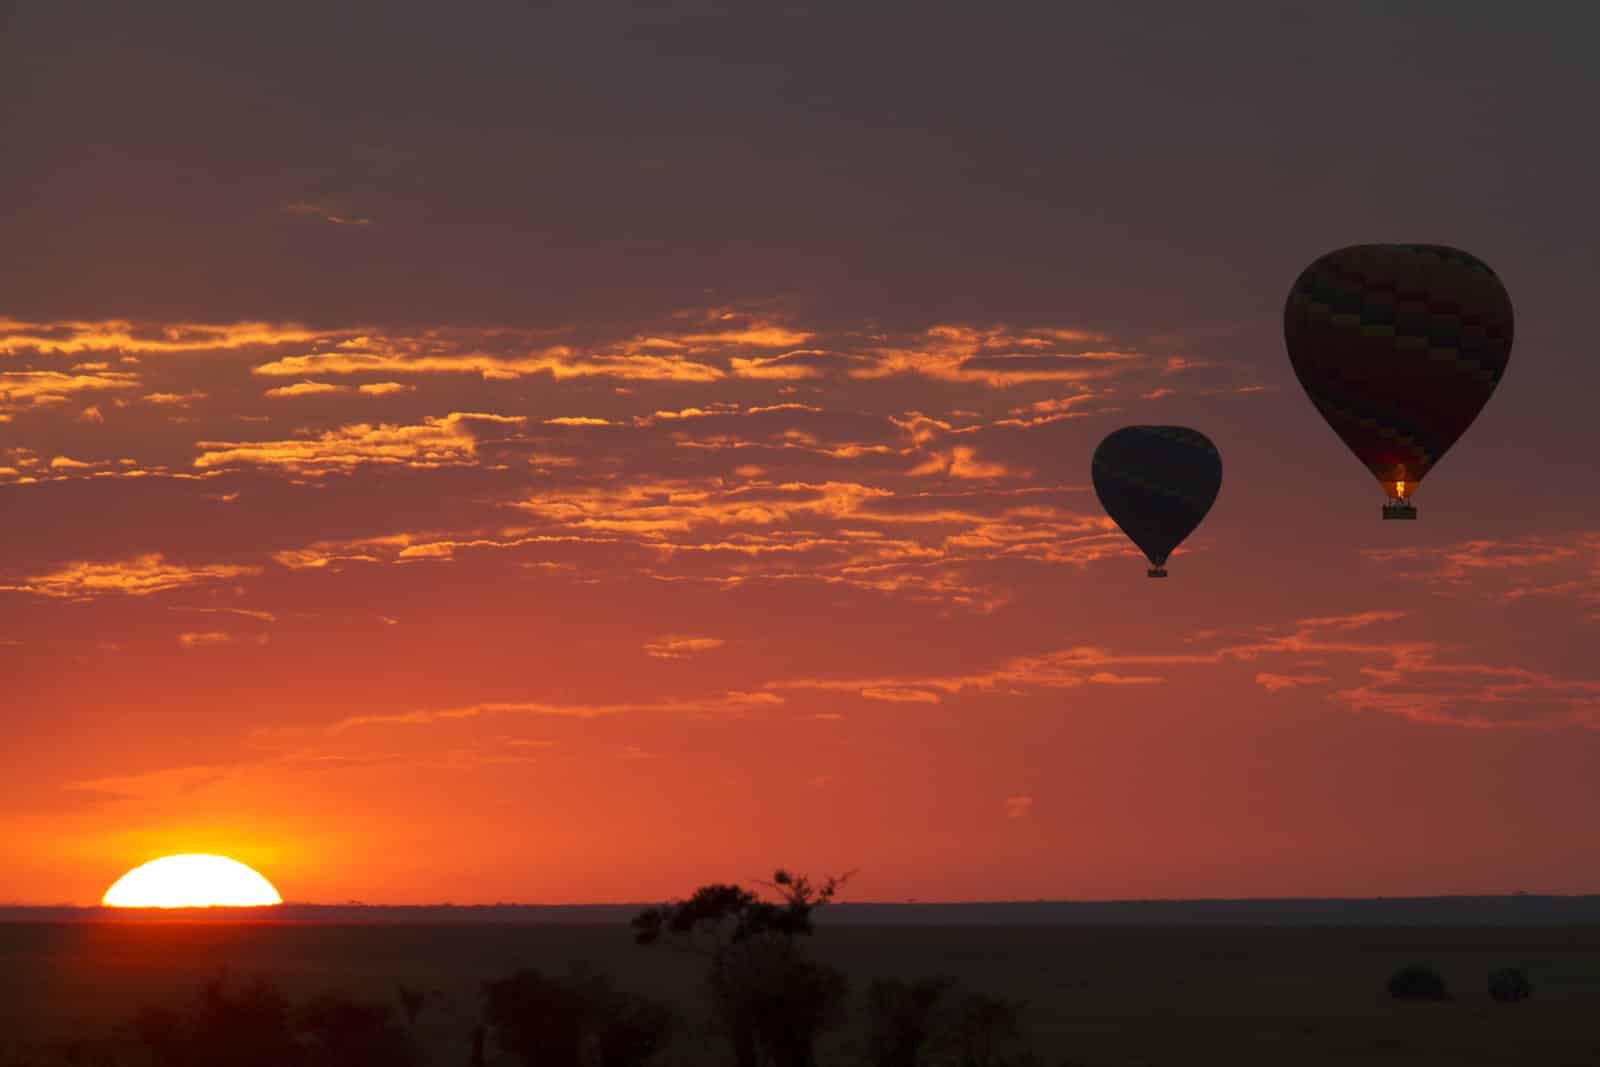 <p><span>A hot-air balloon safari in the Serengeti is an experience of a lifetime. Floating silently above the savannah at sunrise, you witness the park from a vantage point like no other. The balloon’s path, dictated by the morning breezes, offers a tranquil and panoramic view of the sprawling Serengeti below.</span></p> <p><span>From this aerial perspective, the scale and beauty of the park are truly appreciated, revealing patterns of movement and life that are invisible from the ground. The flight culminates in a traditional champagne breakfast in the bush, a fitting end to an unforgettable journey.</span></p> <p><b>Insider’s Tip: </b><span>Book well in advance as these popular safaris have limited capacity. </span></p> <p><b>When to Travel: </b><span>Year-round, with clearer skies during the dry season. </span></p> <p><b>How to Get There: </b><span>Most balloon safaris launch near the Seronera region, accessible from nearby lodges.</span></p>